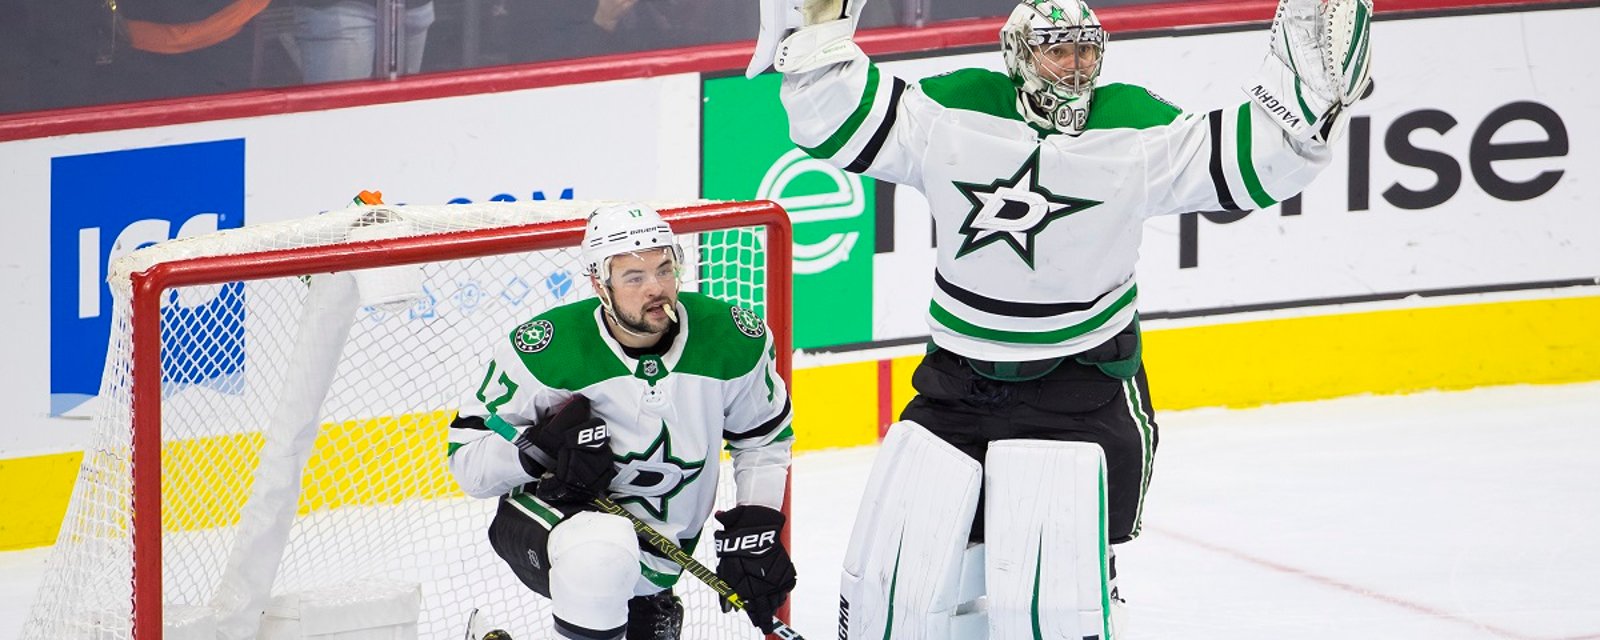 Furious, Anton Khudobin calls out his own team after yet another loss.